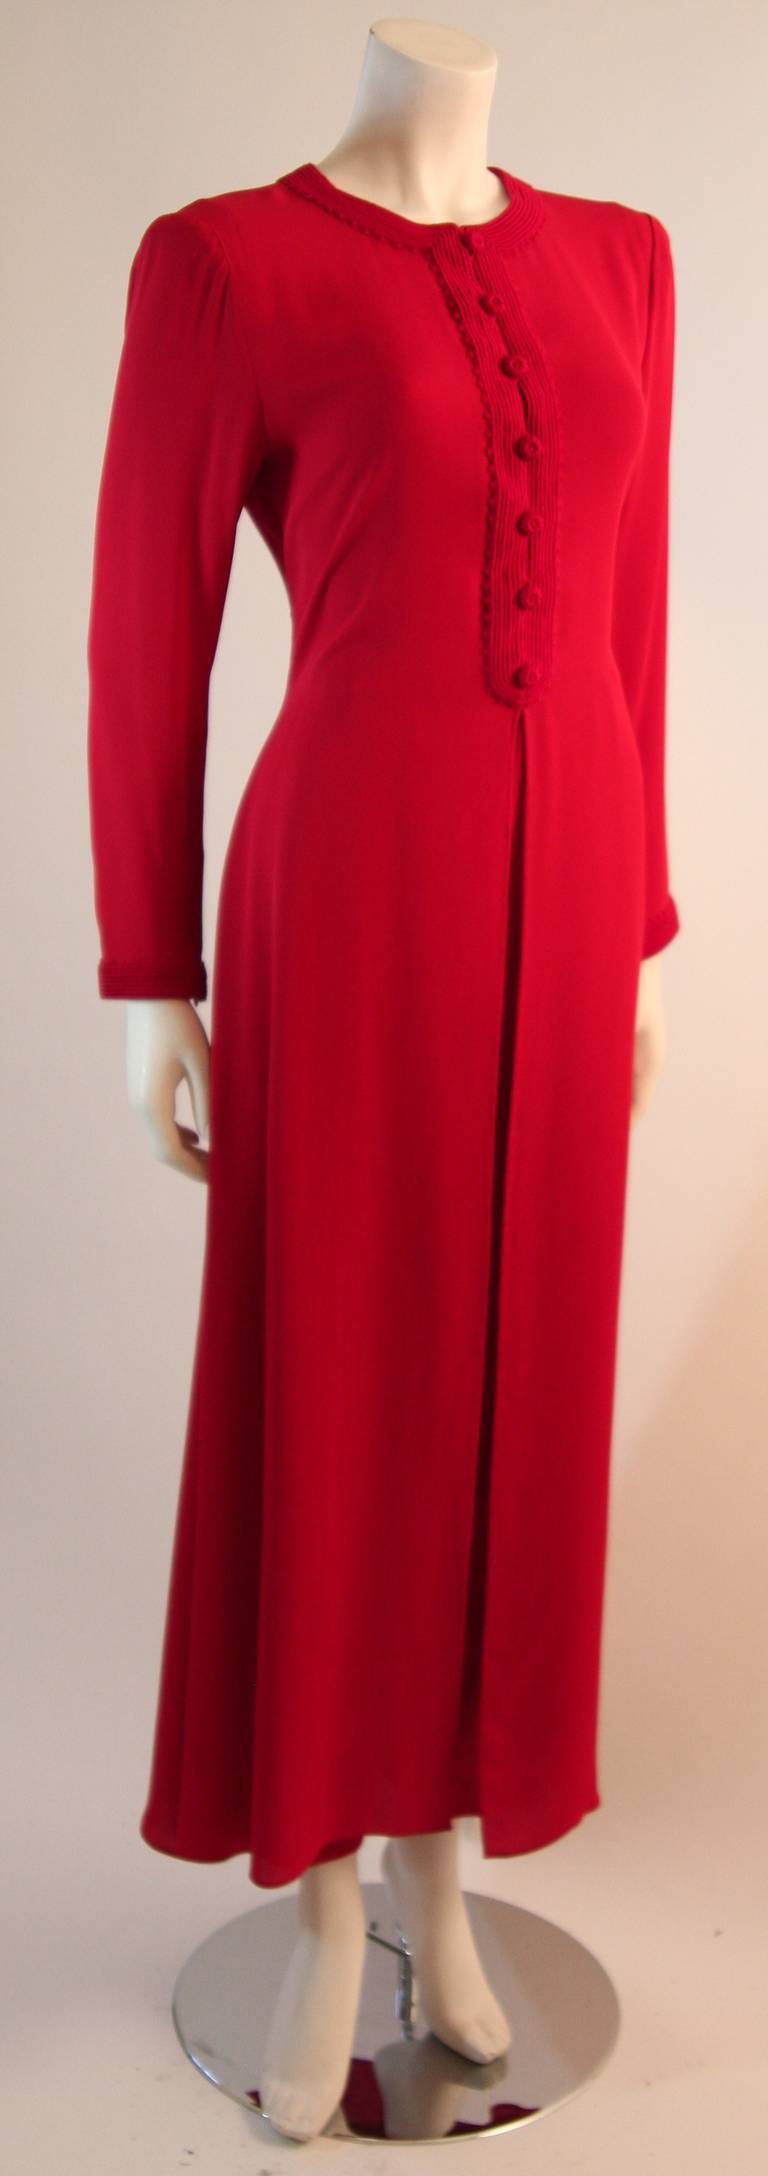 This is a gorgeous Oscar De La Renta pant suit. It is a wonderful hue of original primary red. The color is complimented by the supple and flowing silk fabric. The jacket is trimmed in a wonderful braided accent and center front buttons. The pants